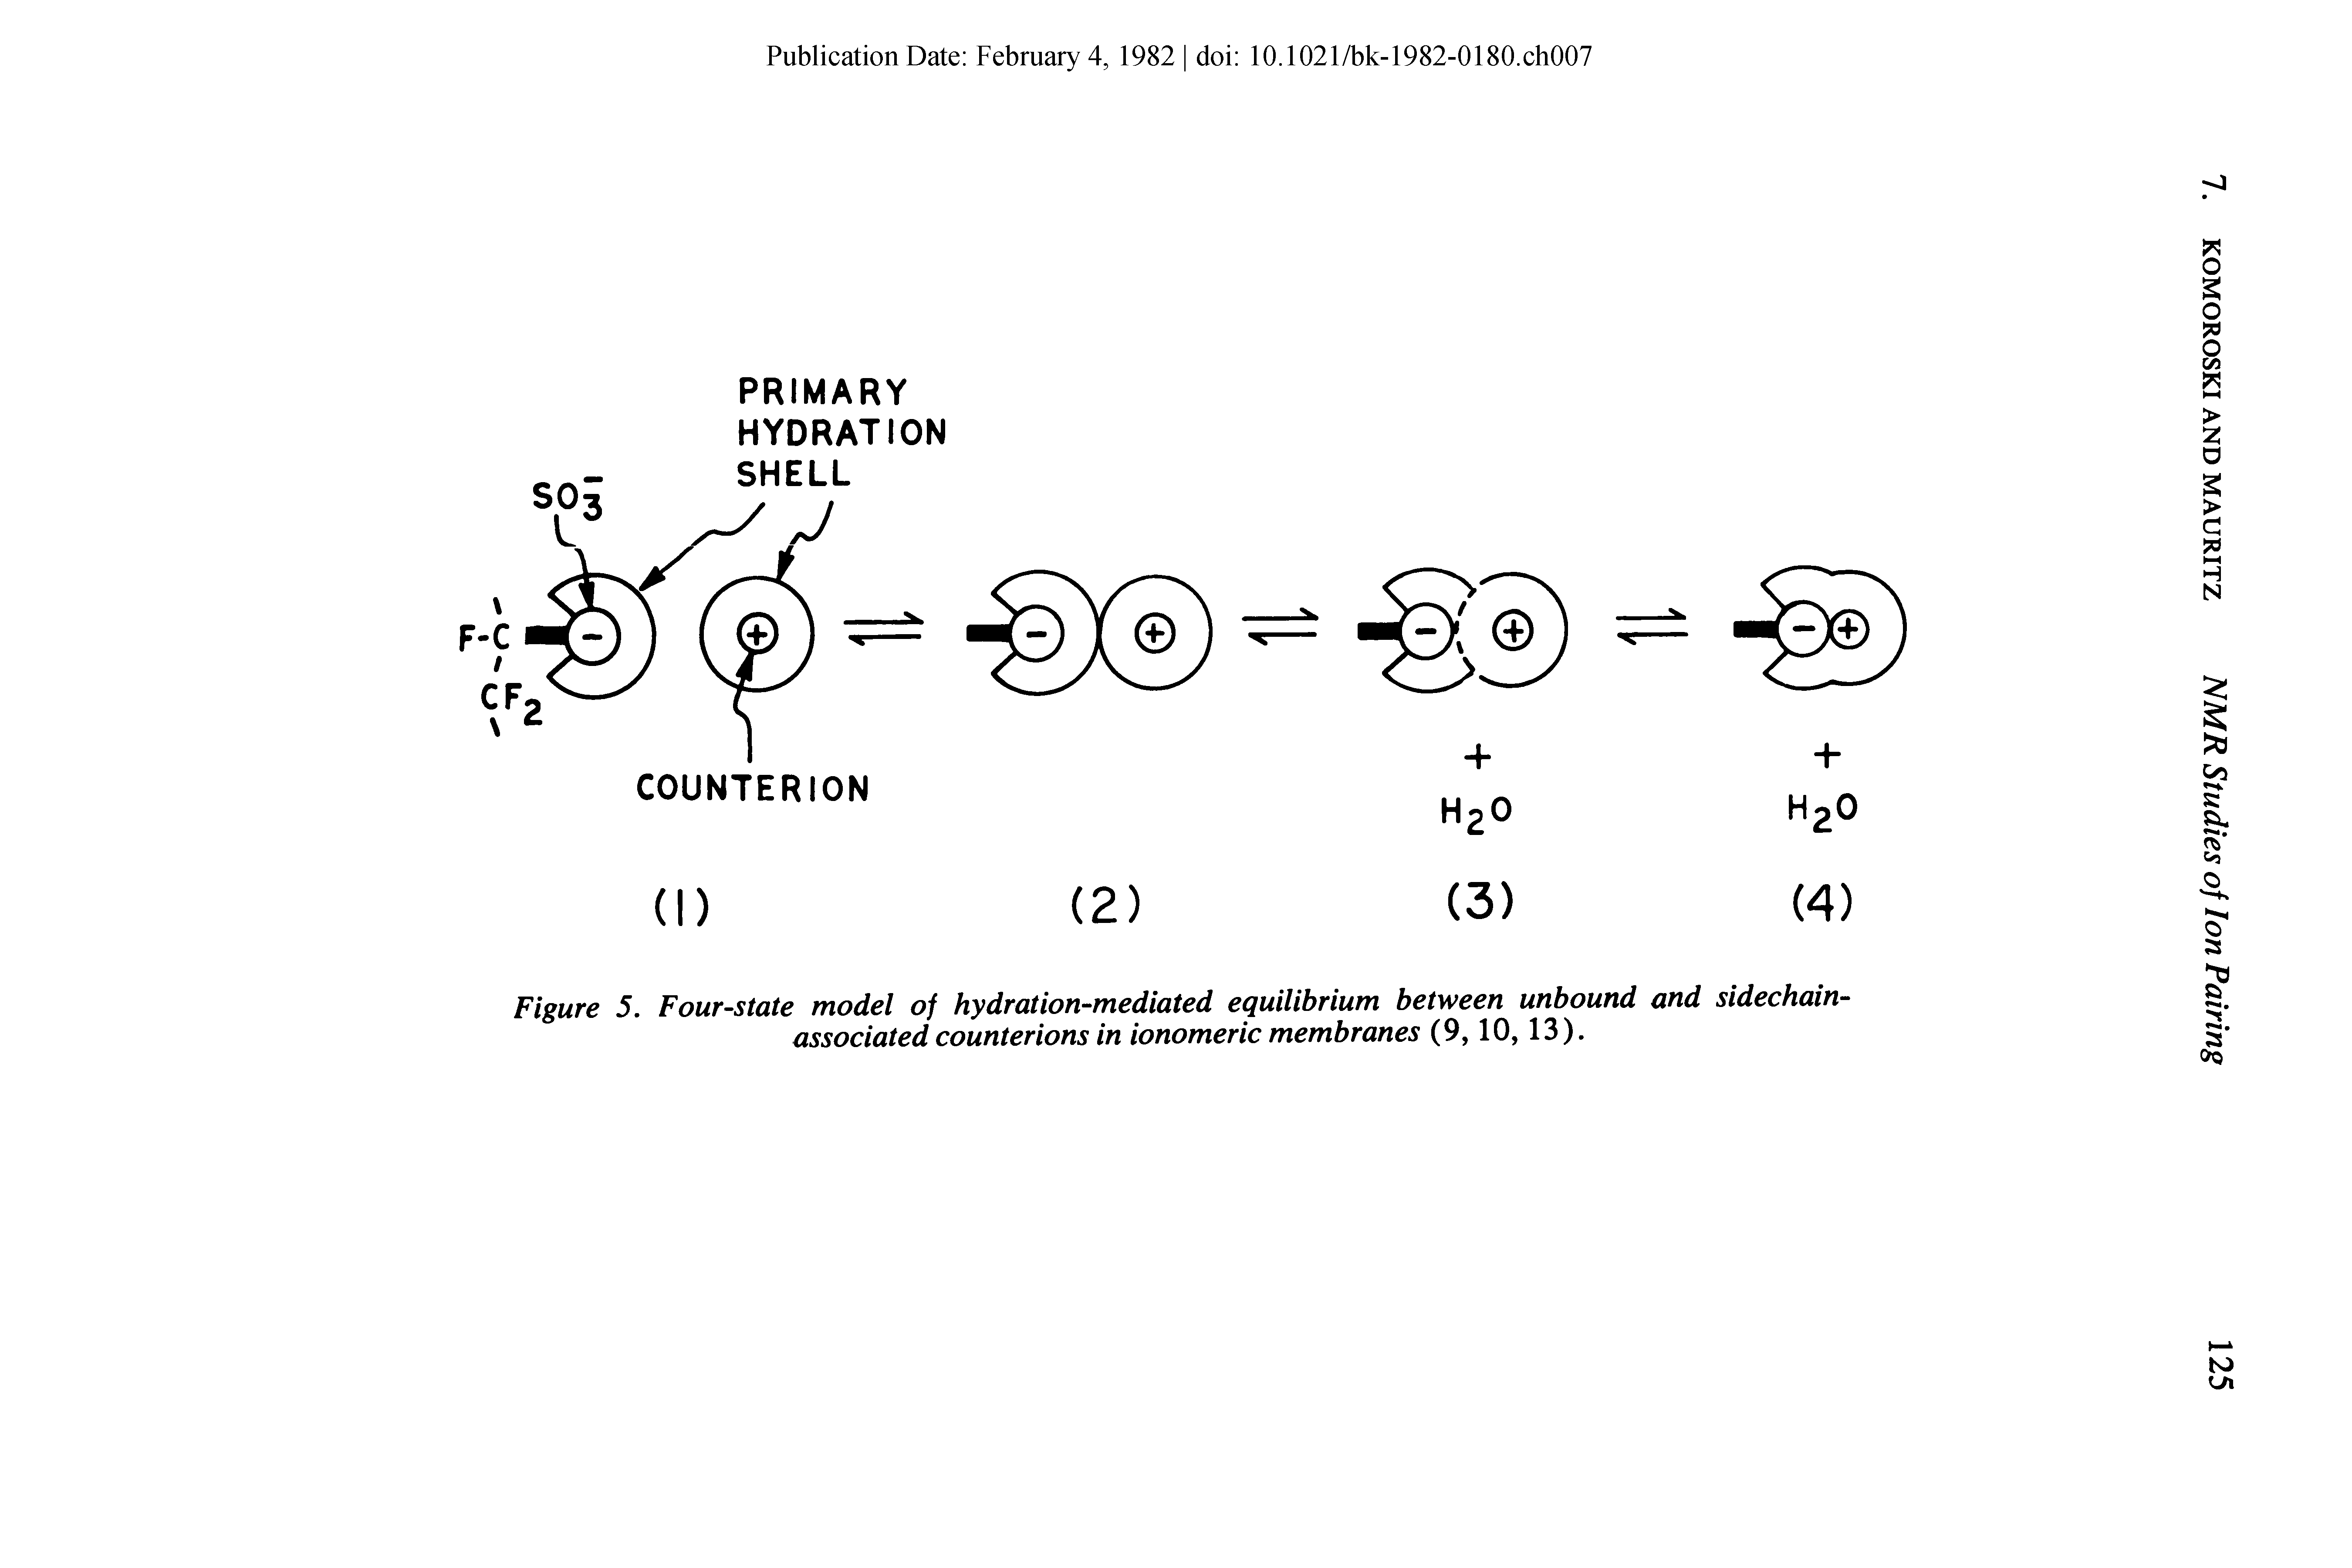 Figure 5. Four-state model of hydration-mediated equilibrium between unbound and sidechain-associated counterions in ionomeric membranes (9,10, 13).